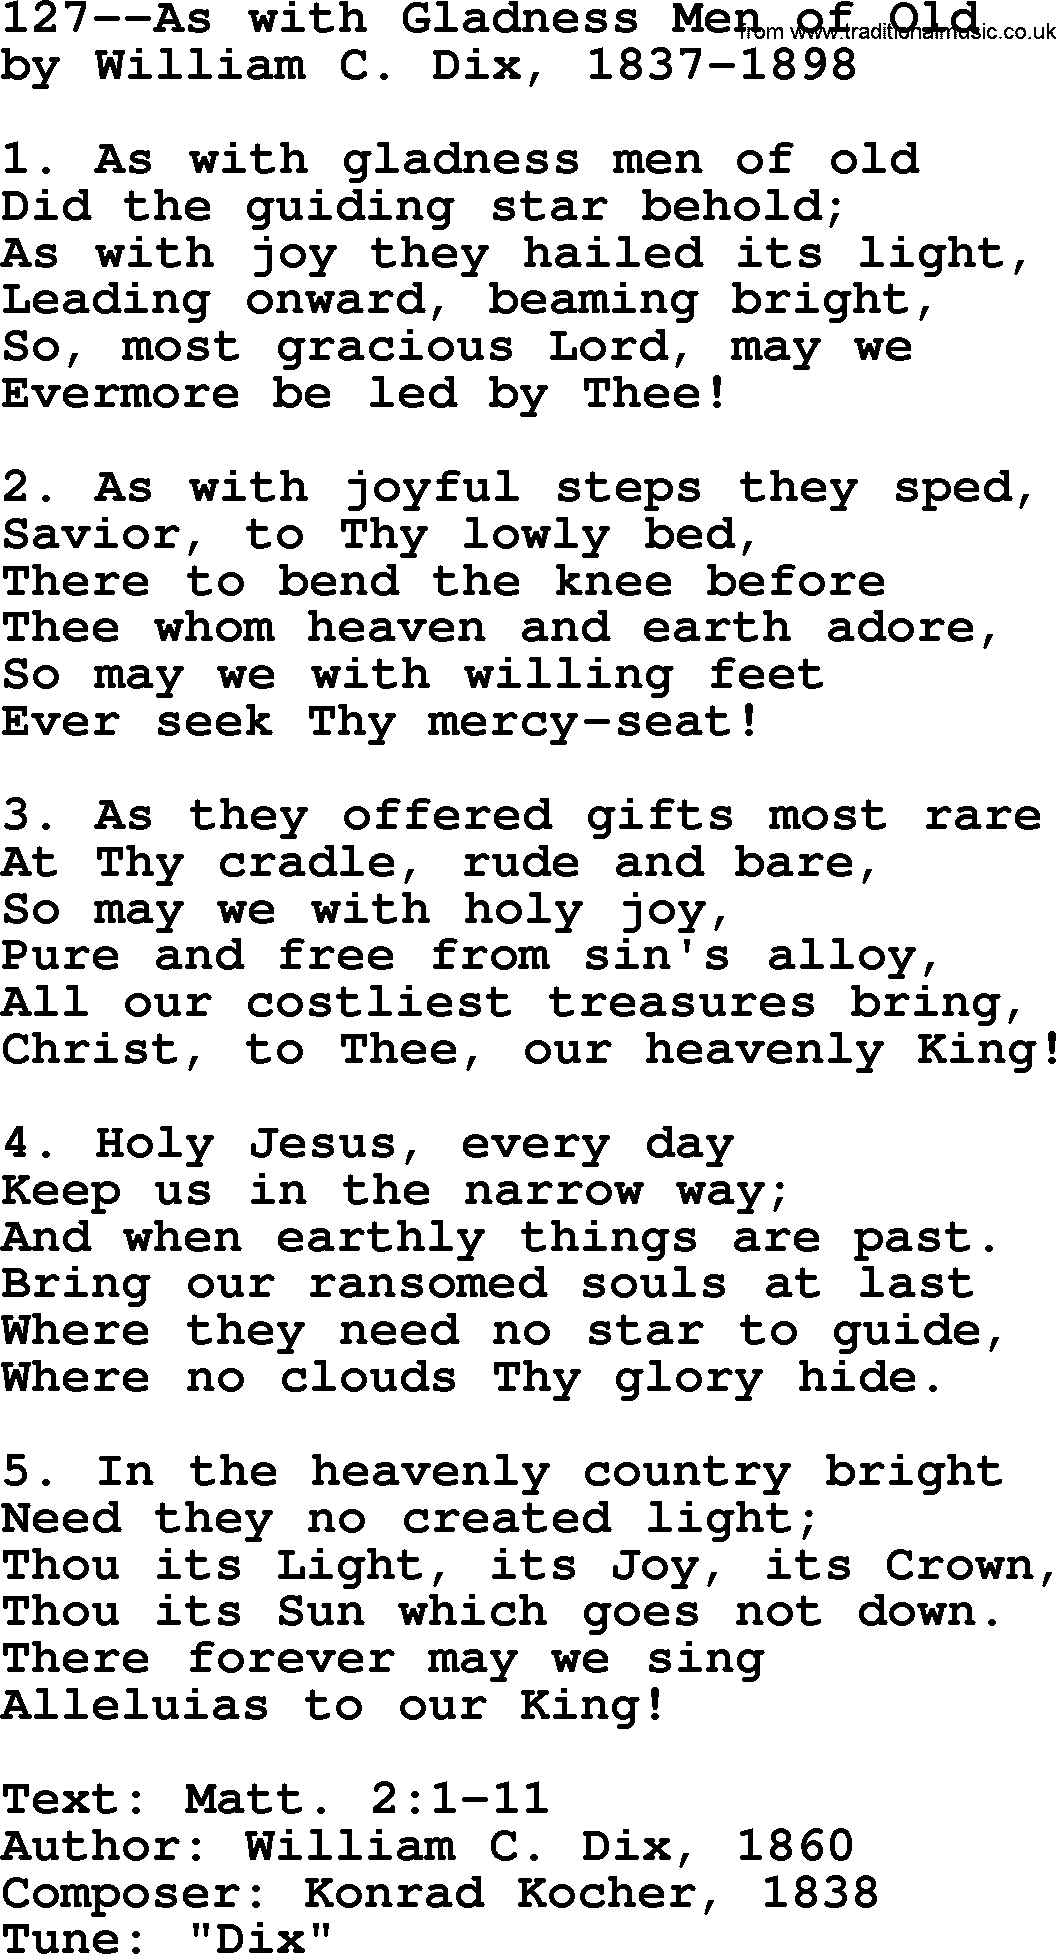 Lutheran Hymn: 127--As with Gladness Men of Old.txt lyrics with PDF